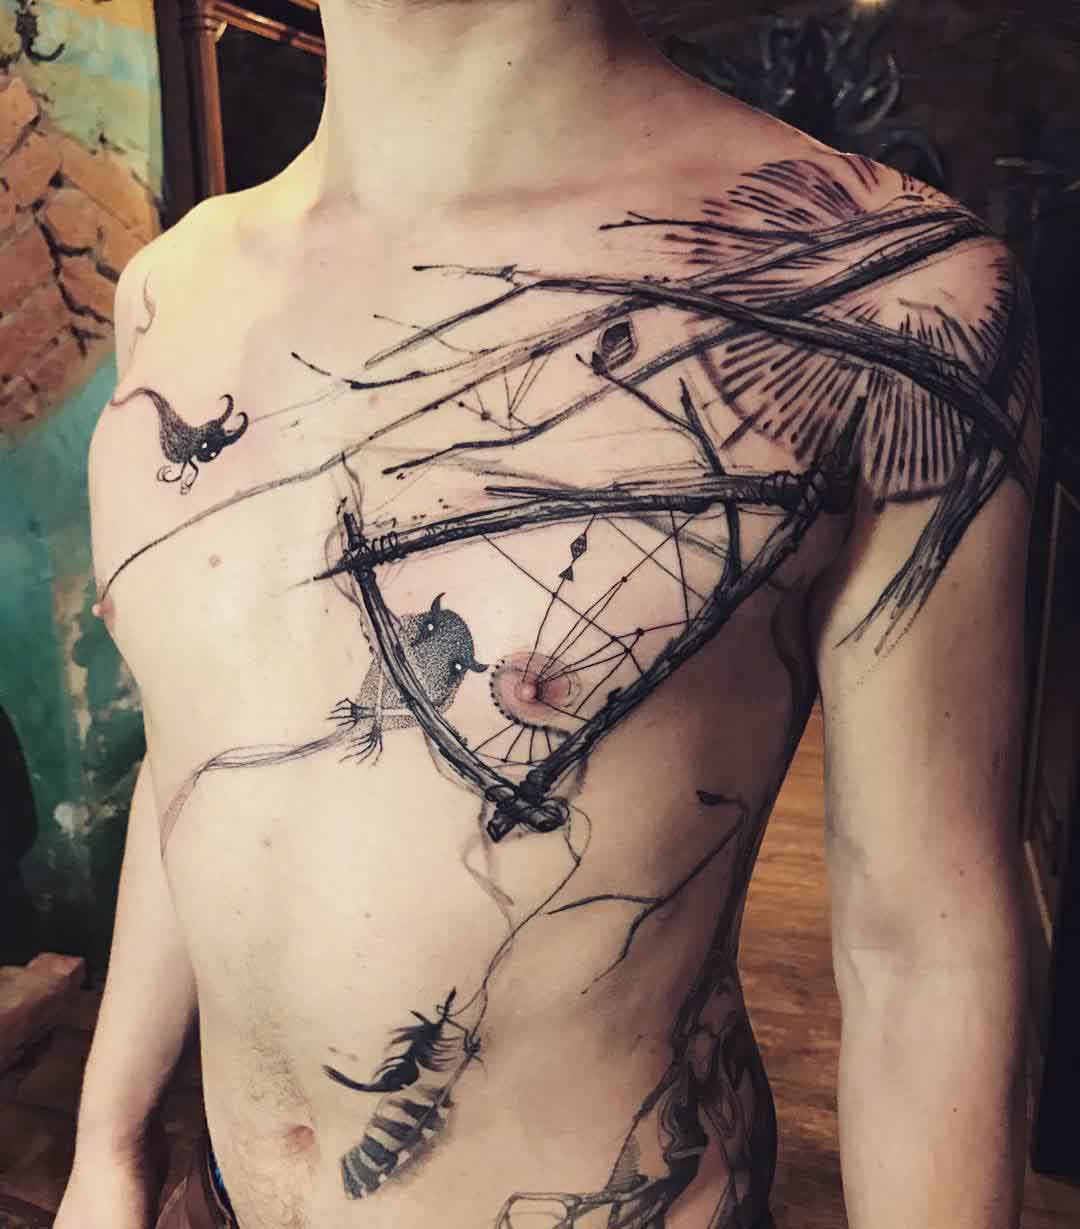 Awesome Chest Tattoo and Torso